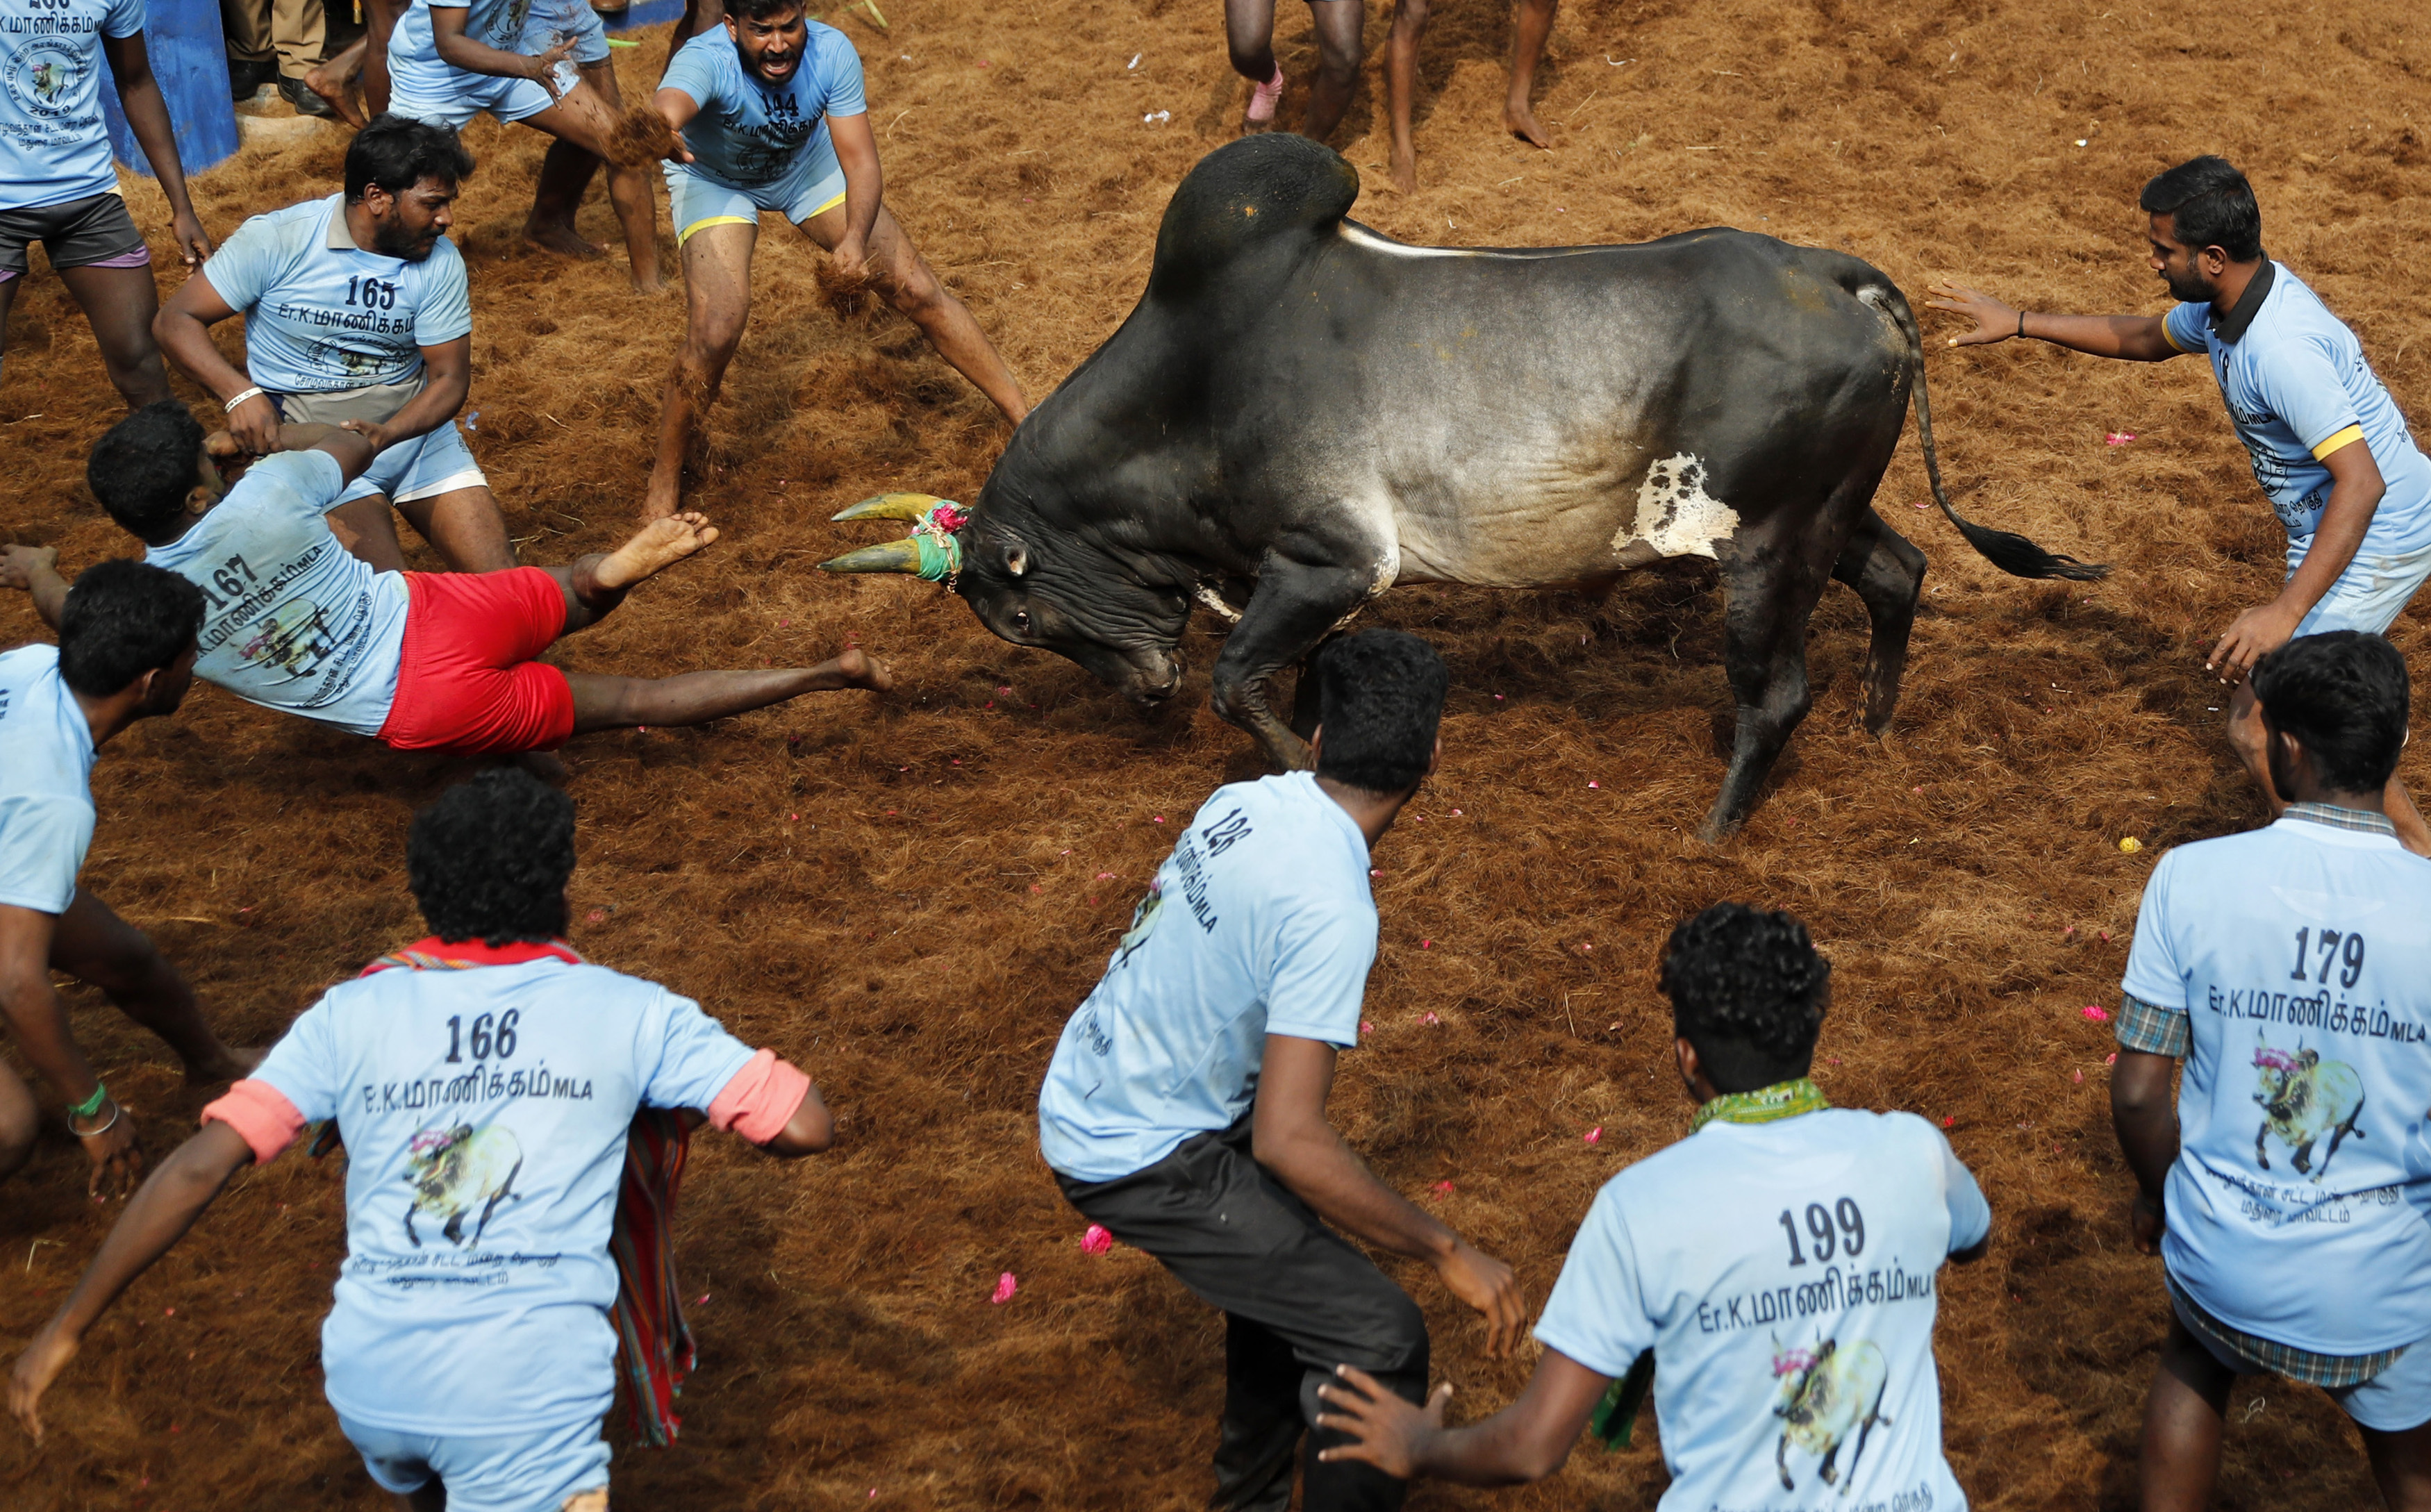 Bull charges towards tamers during a traditional bull-taming festival called Jallikattu, in the village of Allanganallur, near Madurai, Tamil Nadu state, India - AP